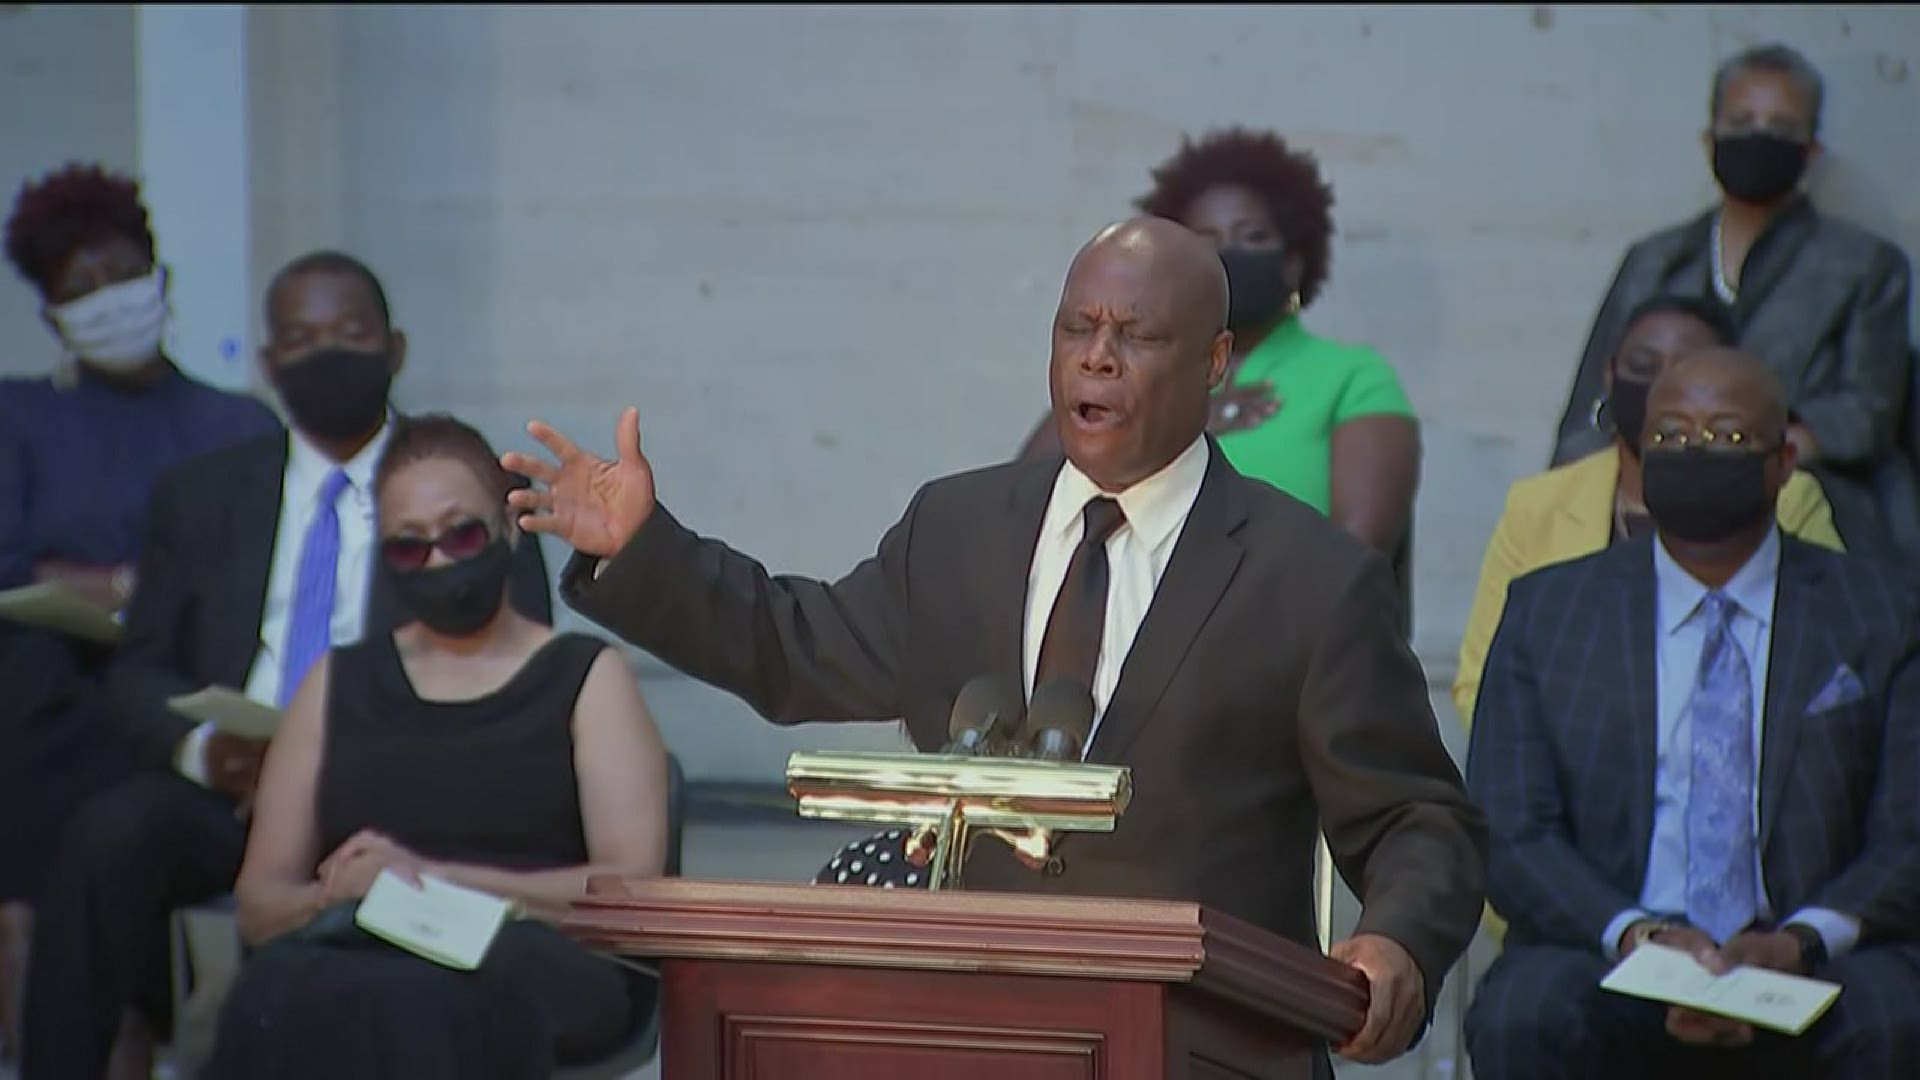 Rev. Wintley Phipps 'It Is Well' at John Lewis's memorial service at the Capitol Rotunda.